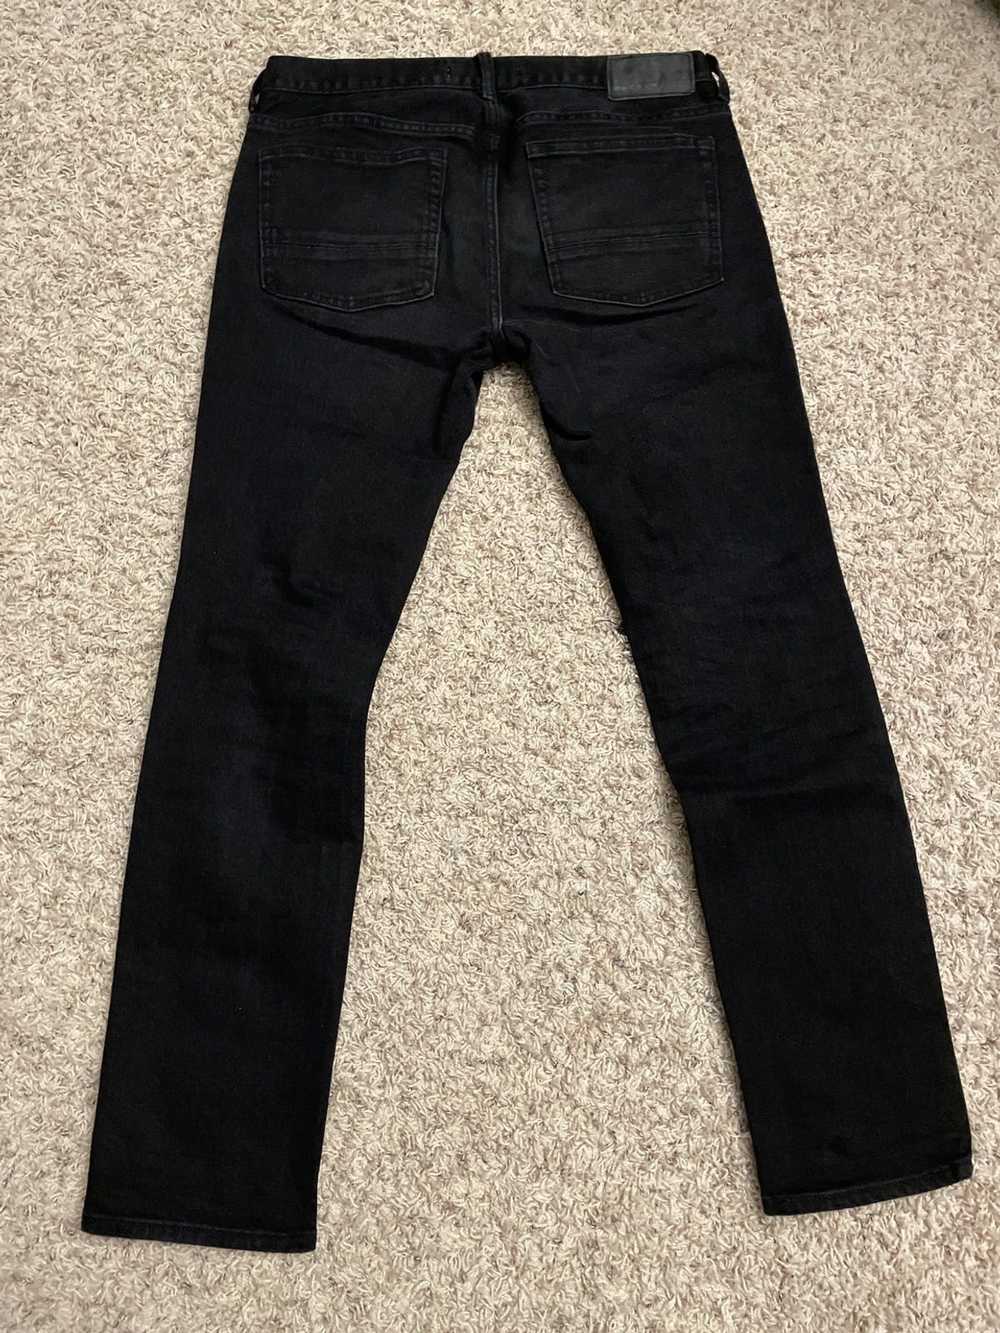 Pacsun PacSun Ripped Knees Black Skinny Jeans - image 3